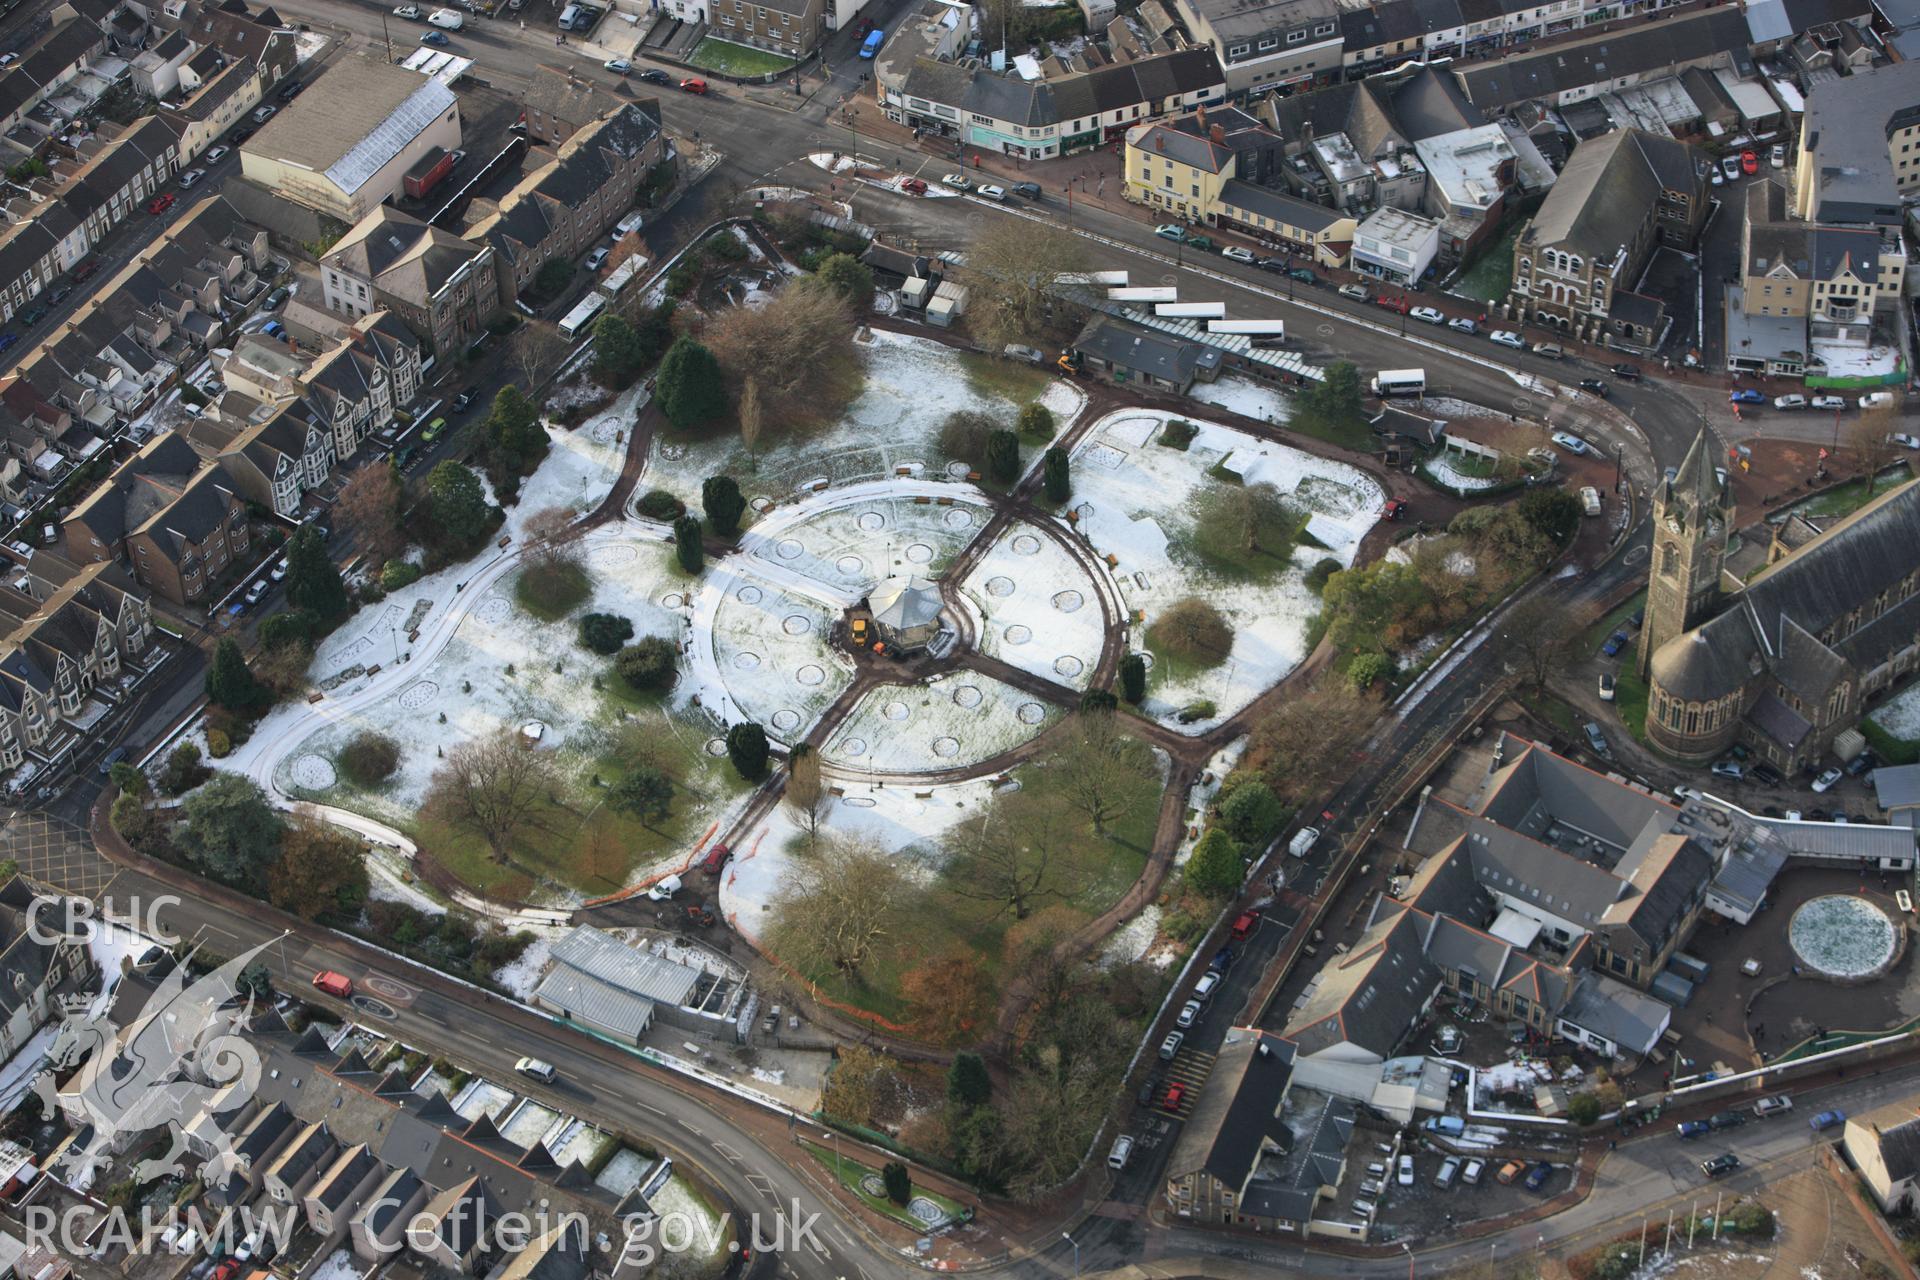 RCAHMW colour oblique photograph of Victoria Gardens, Neath, with snow. Taken by Toby Driver on 01/12/2010.